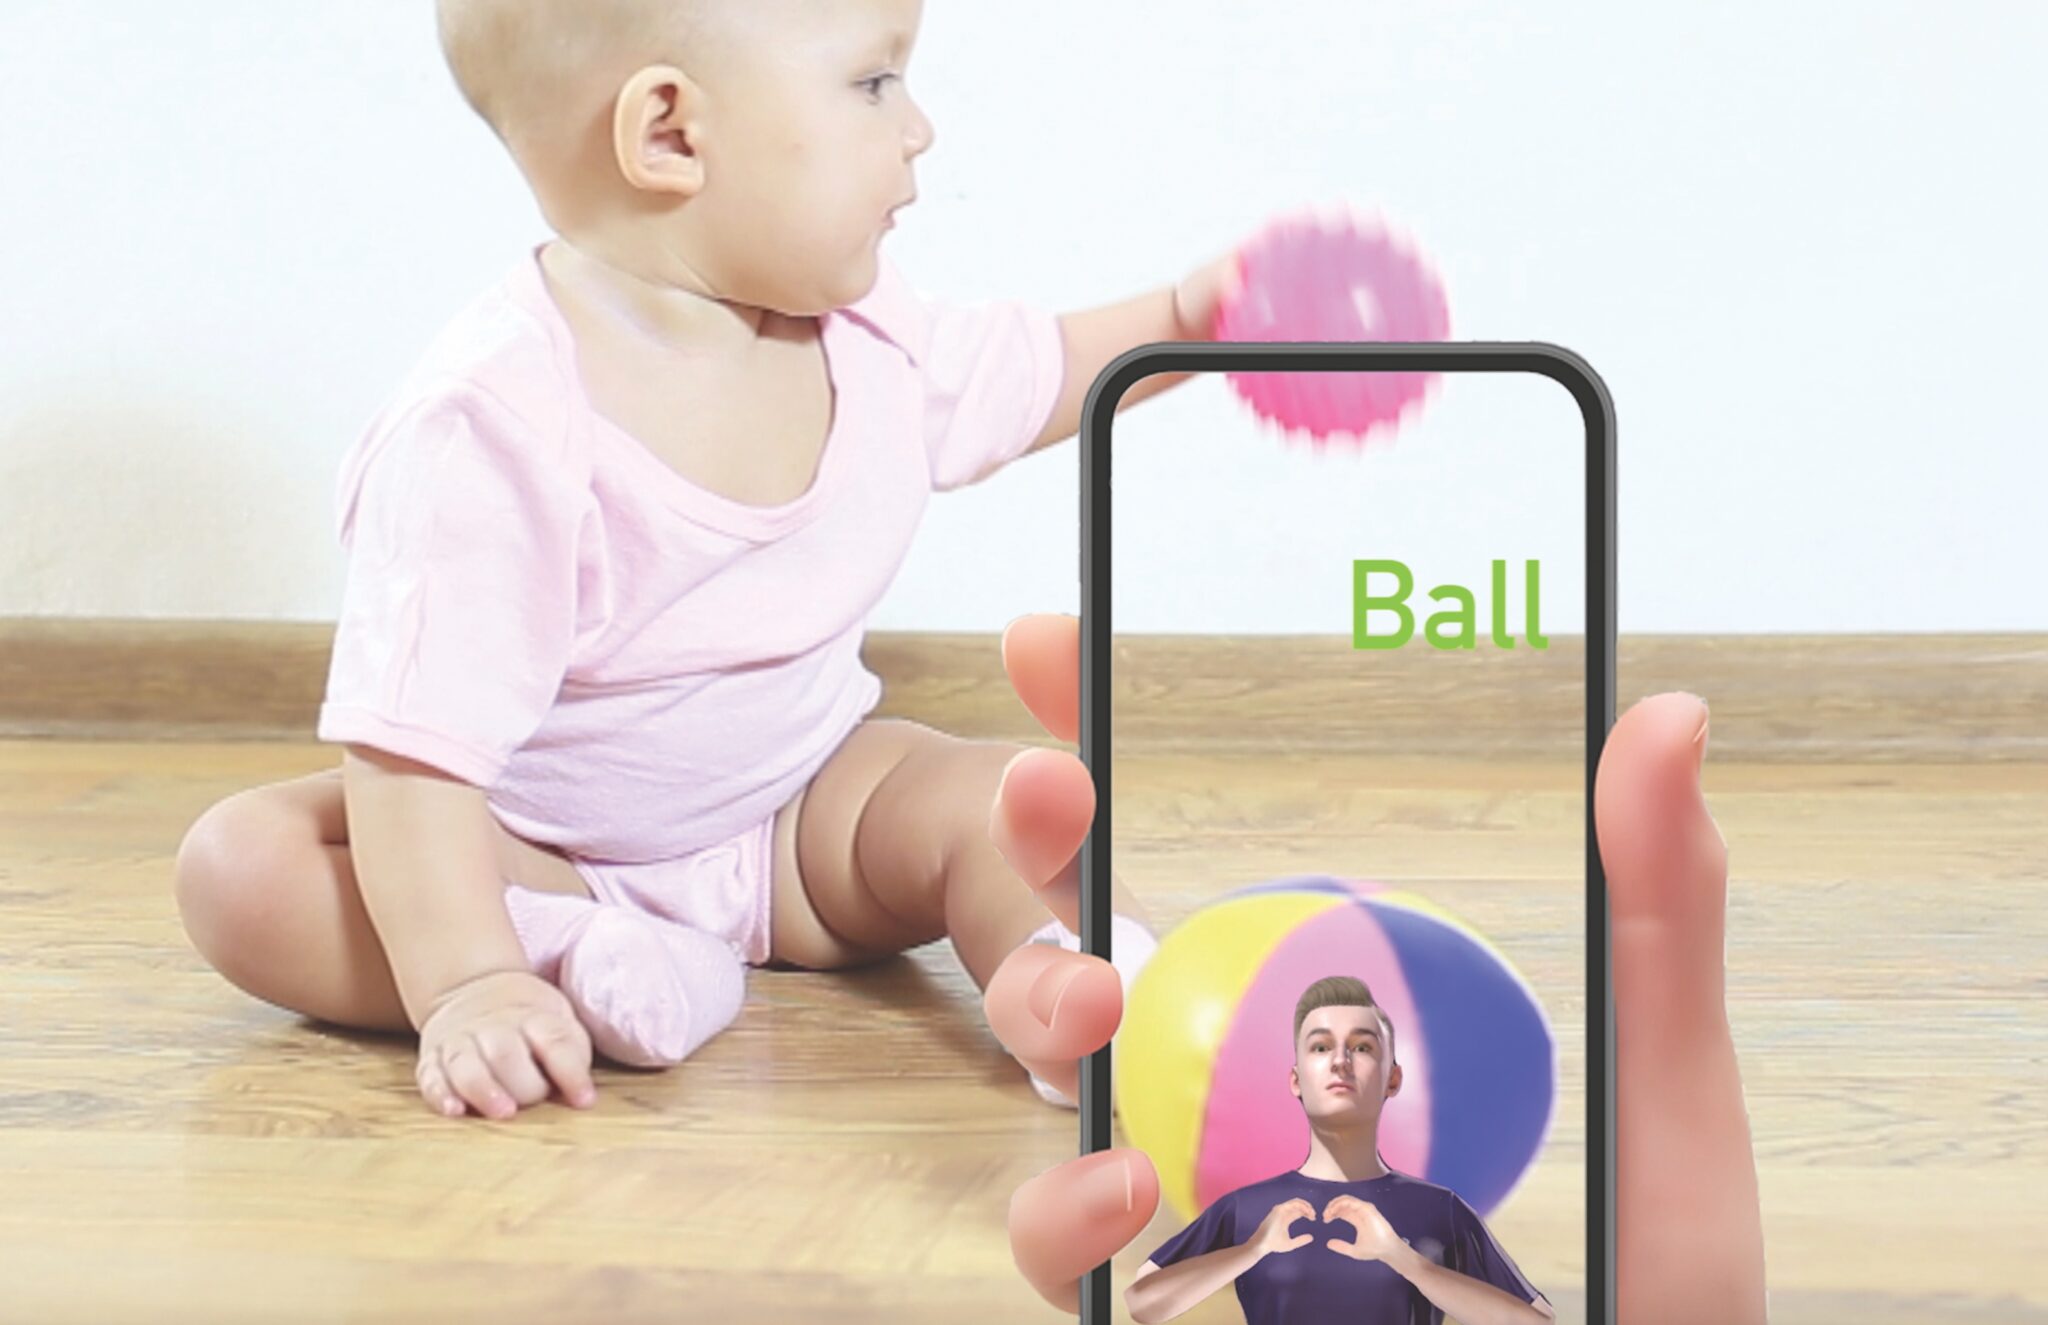 A baby plays with a ball while a hand holds a phone in the foreground.